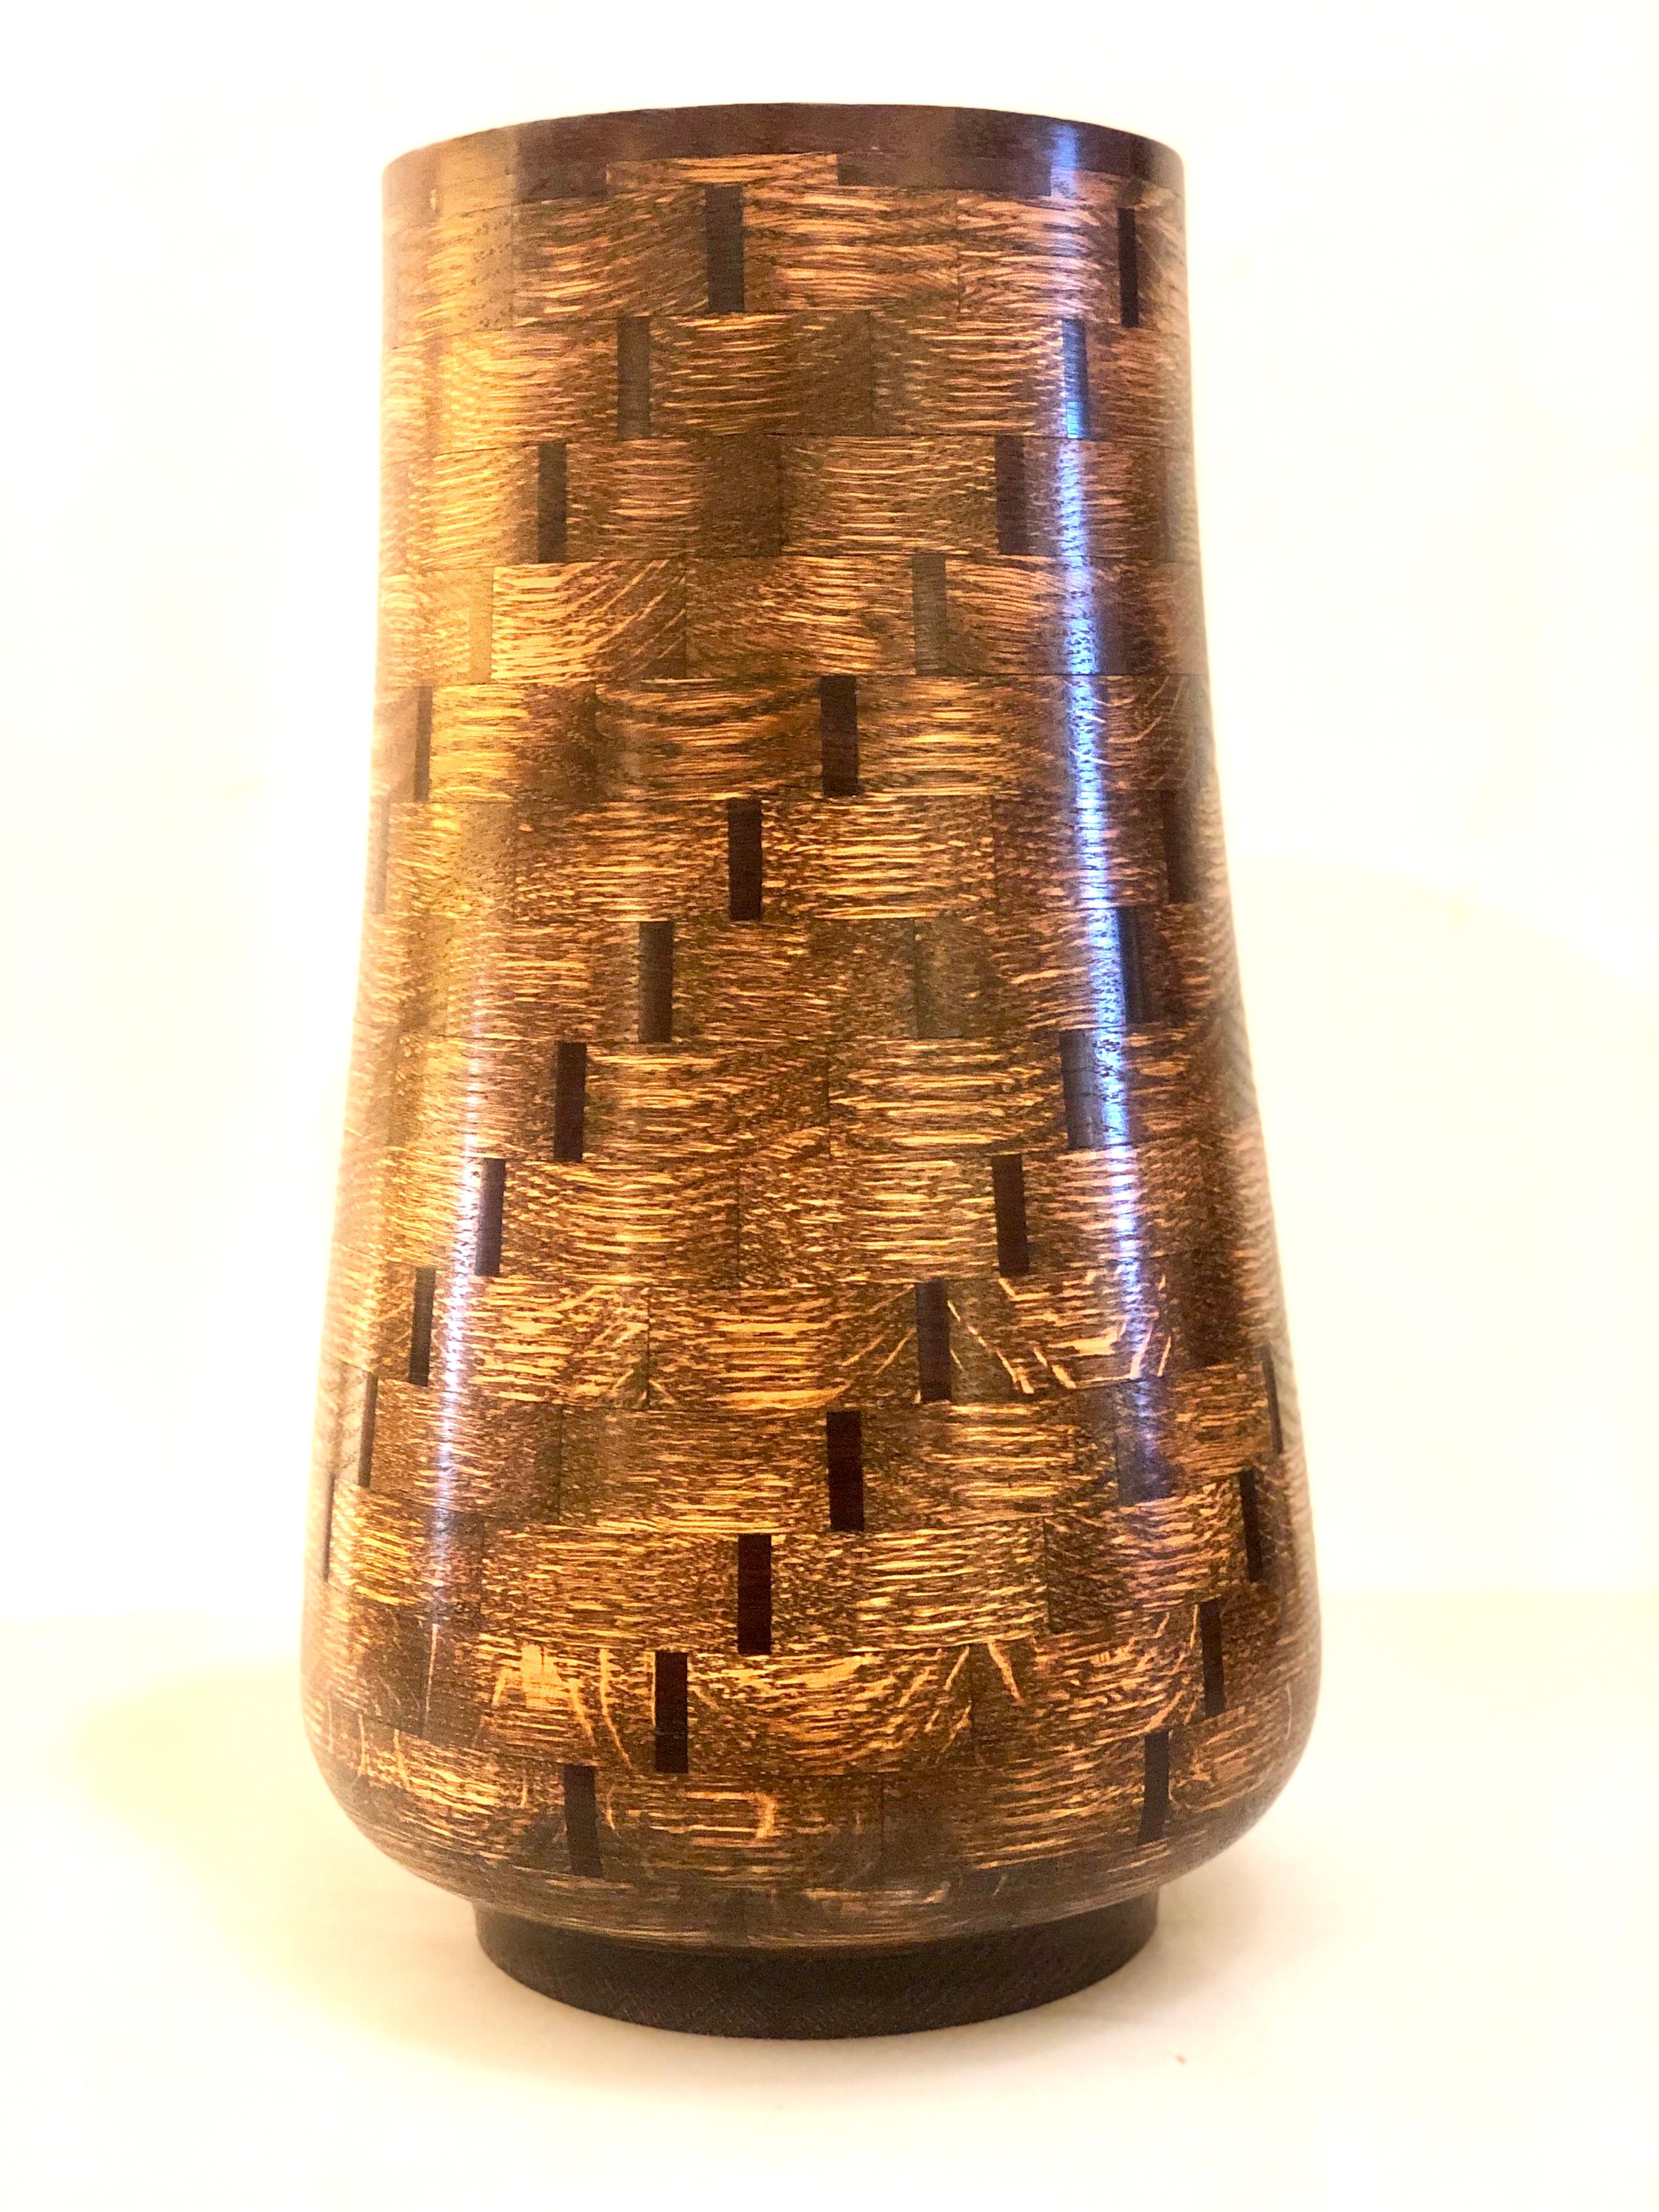 Handmade ebonized red oak & purple heart tall wood vase signed & dated, beautiful piece of art in great condition.